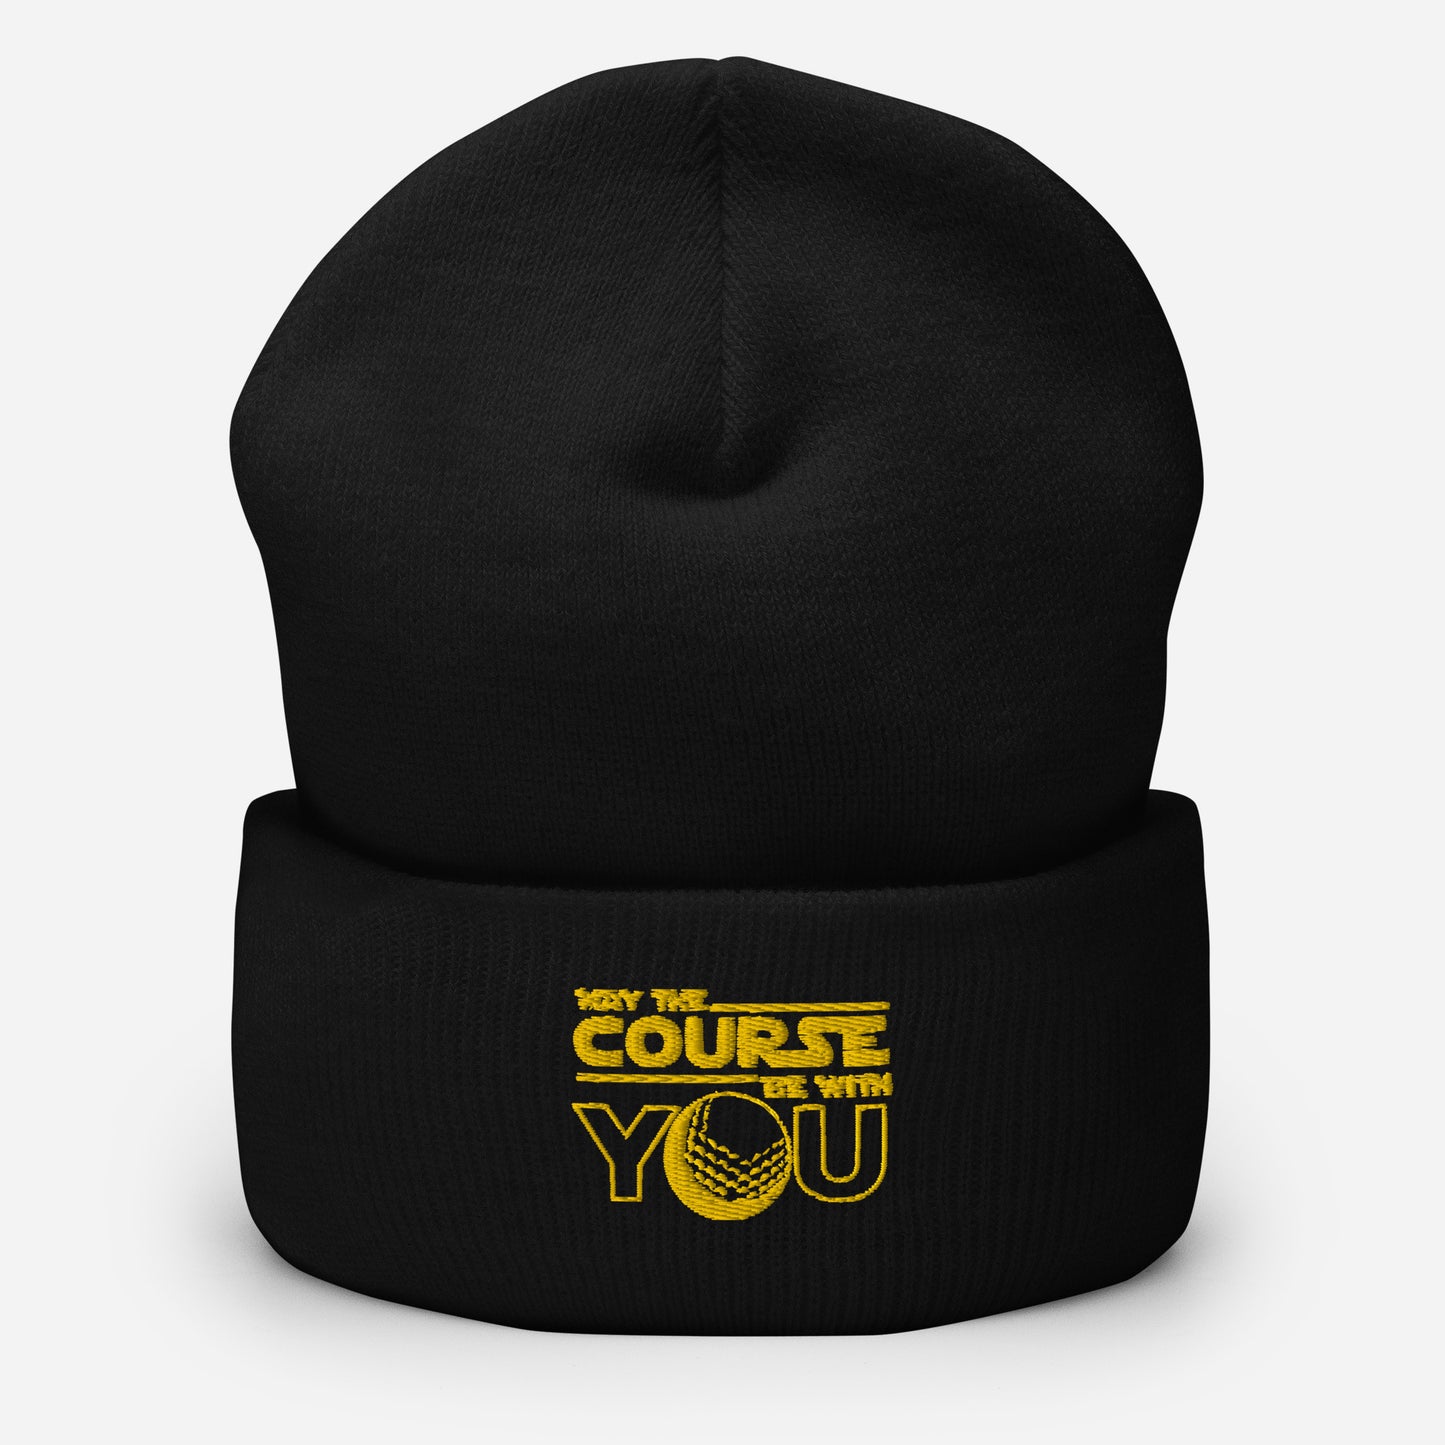 May The Course Be With You Beanie (Black with Yellow Lettering)